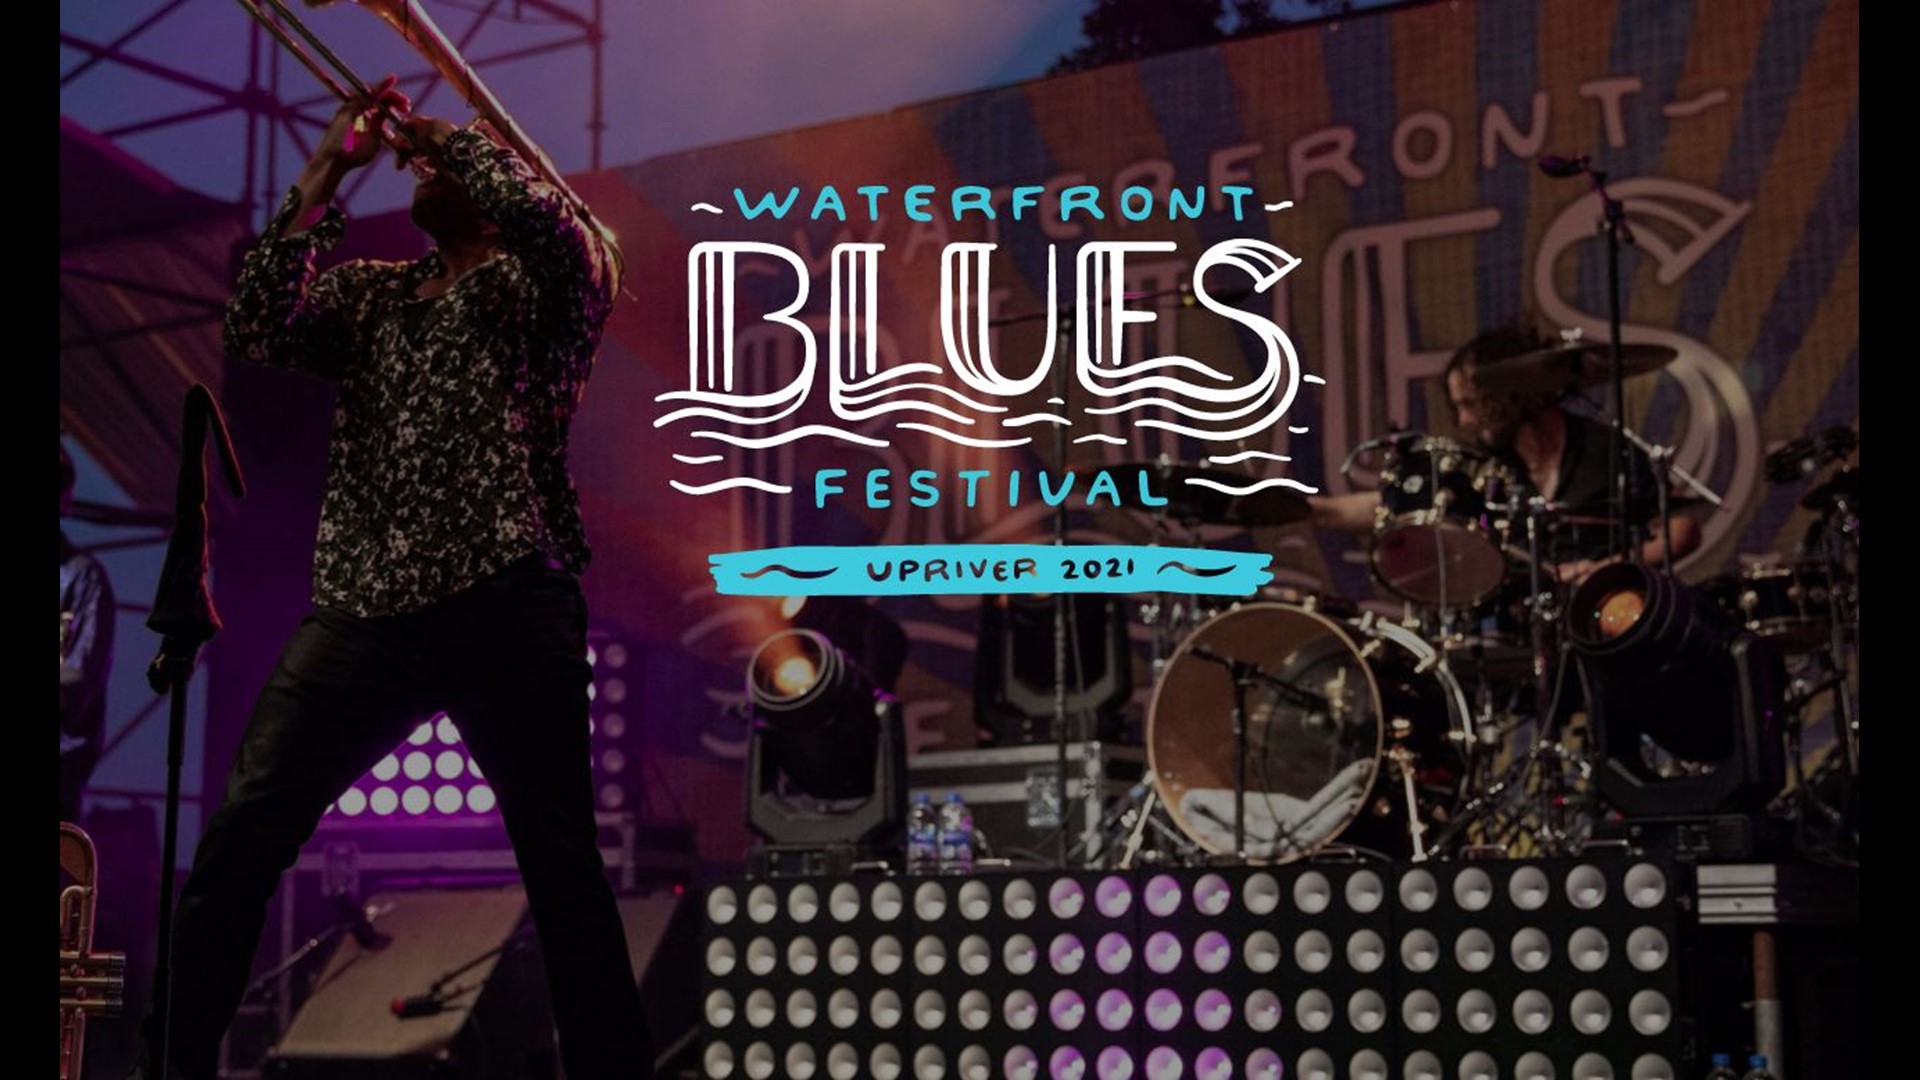 The Waterfront Blues Festival starts on July 1 with the Blues Fest Cares concert. The festival goes until July 5.